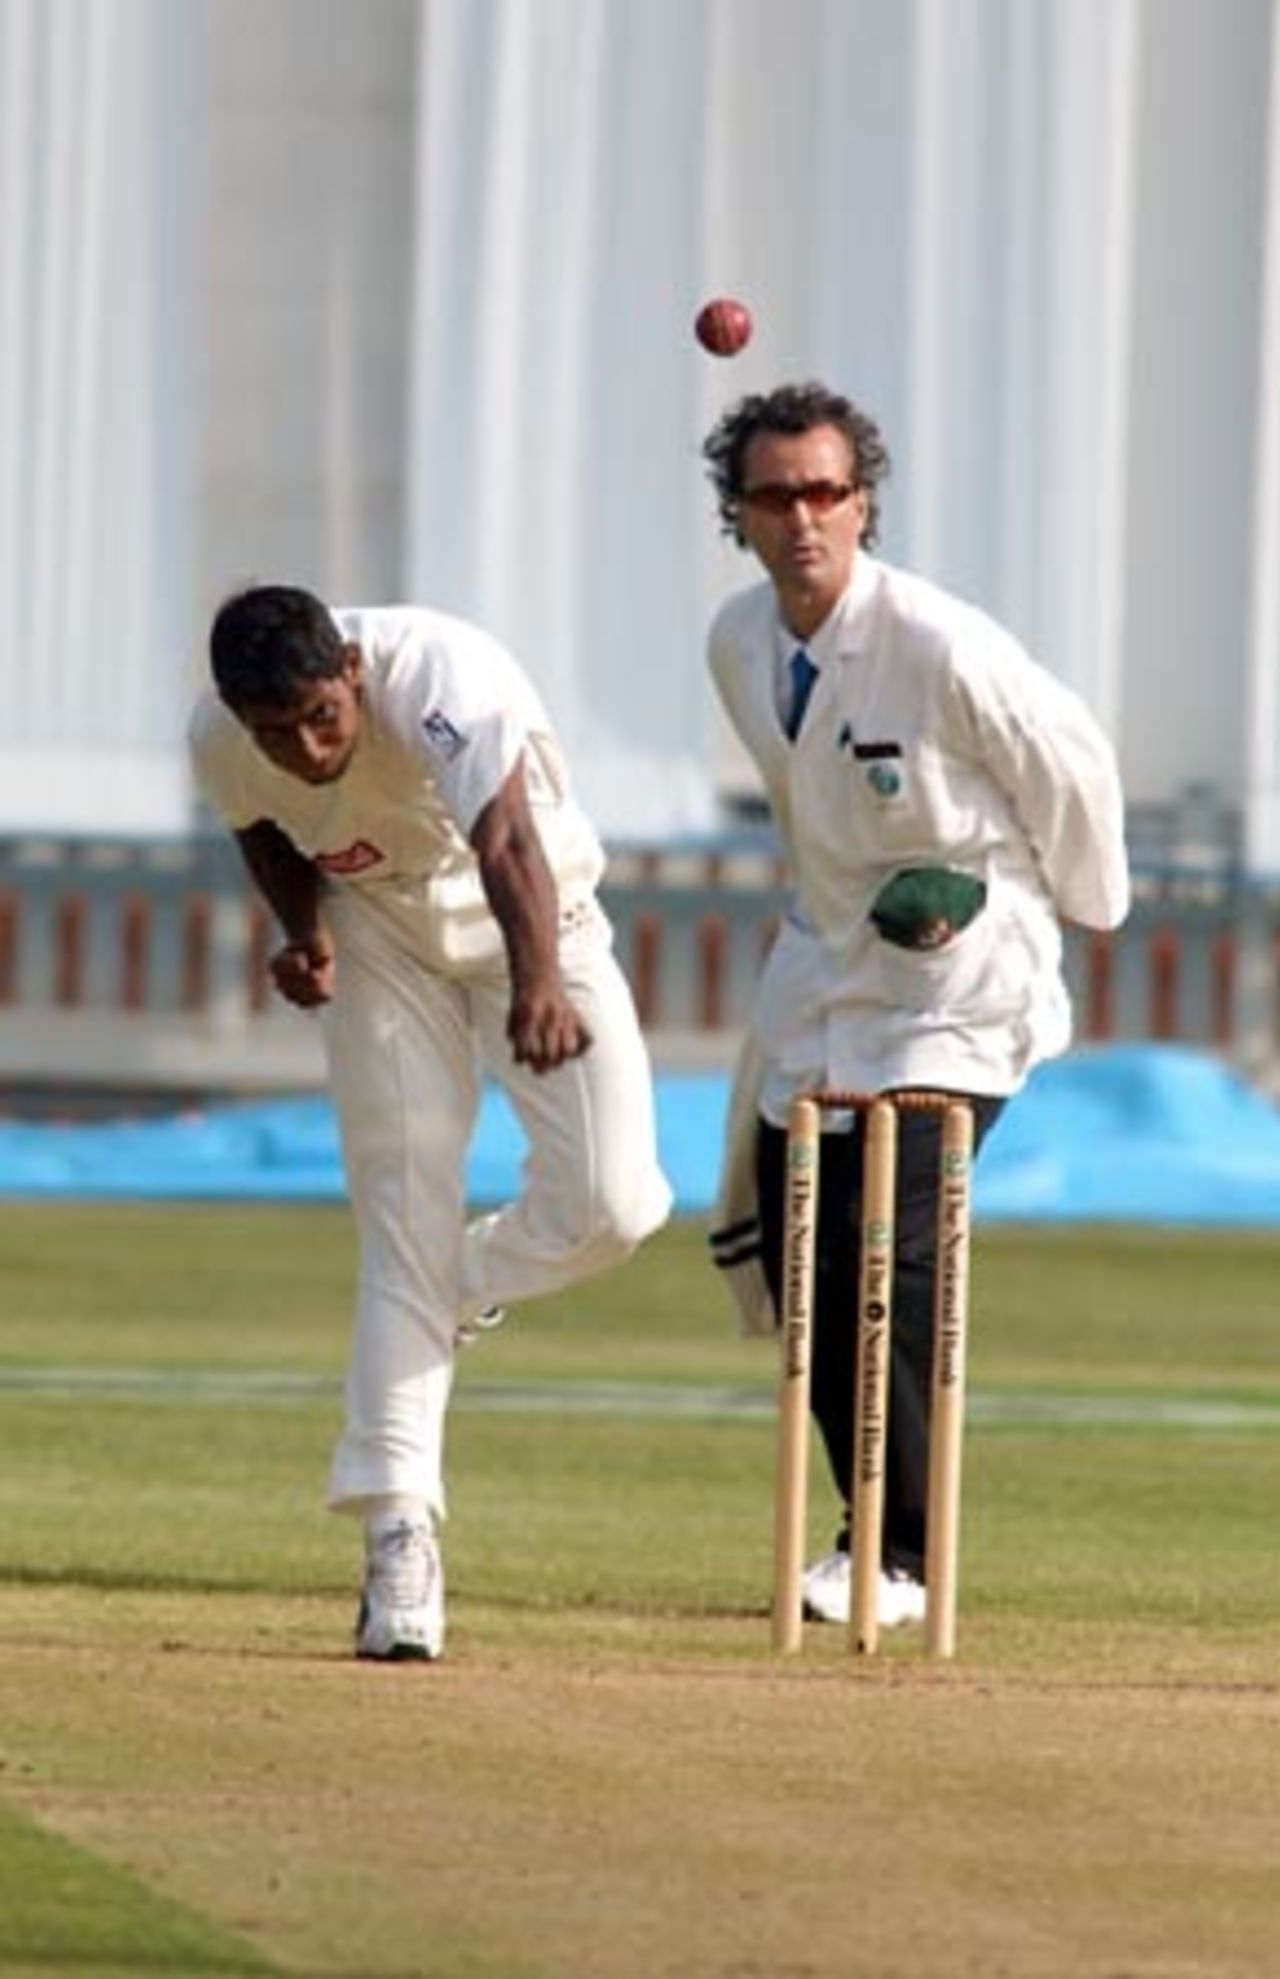 Bangladesh bowler Manjural Islam delivers a ball during his spell of 0-17 from seven overs on the first day. Umpire Brent Bowden looks on. 2nd Test: New Zealand v Bangladesh at Basin Reserve, Wellington, 26-30 Dec 2001 (26 December 2001).